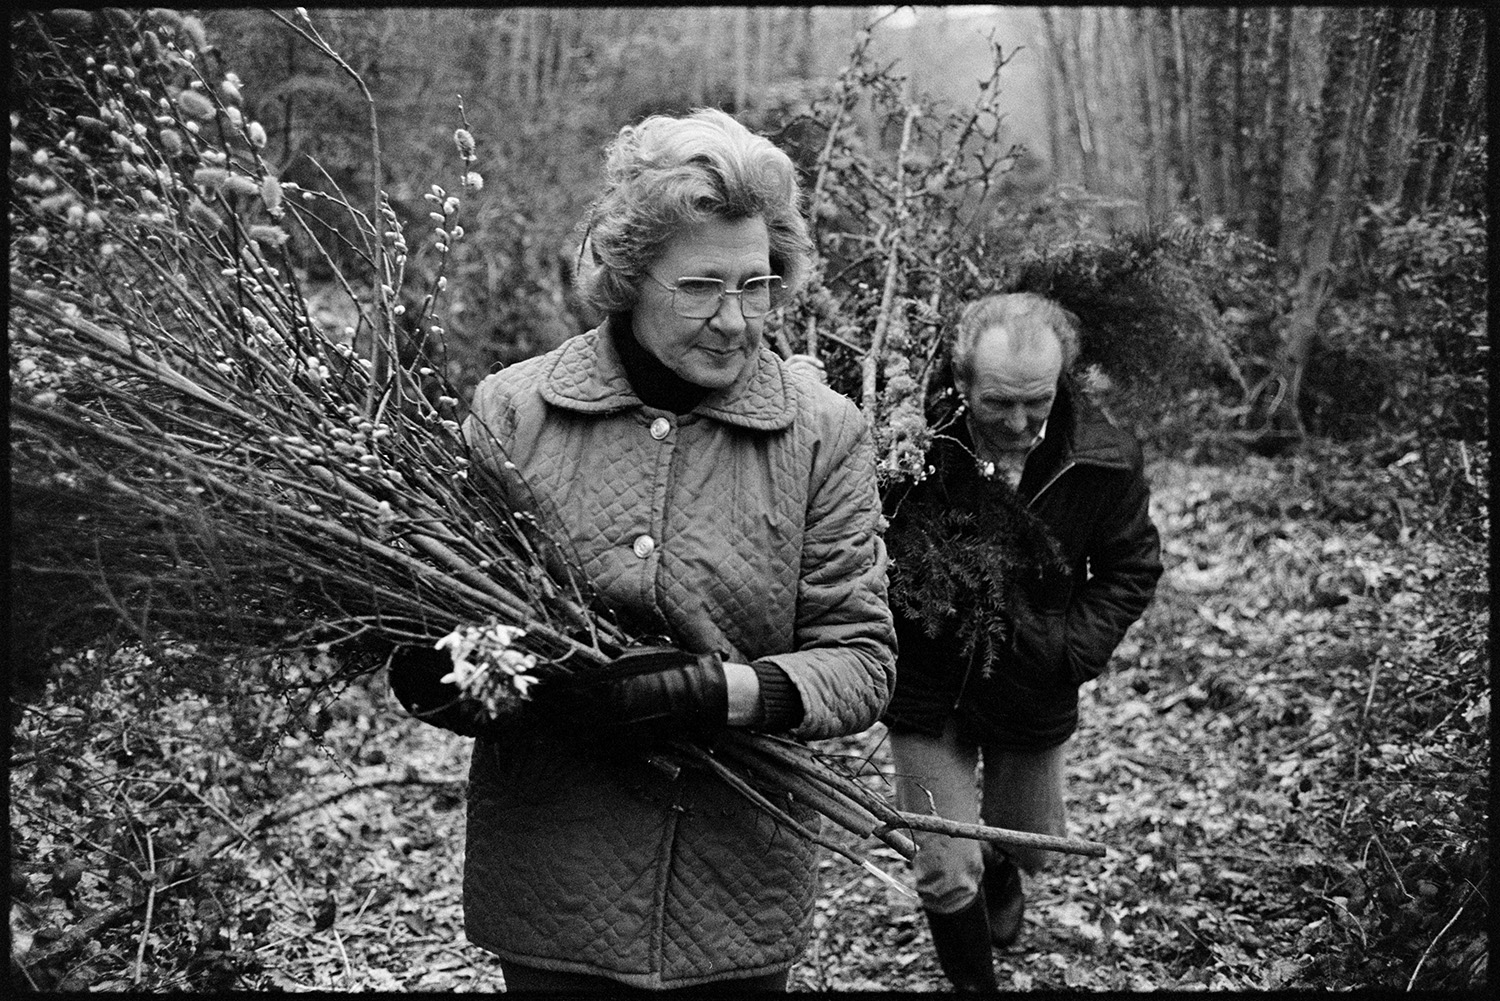 Couple collecting branches and Pussy Willow for Easter decorations in church. 
[Beatrice Nancekivell and Tom Nancekivell carrying branches of pussy willow along a path by a wooded area at Combehouse, Dolton, to use in Easter decorations at the Church.]